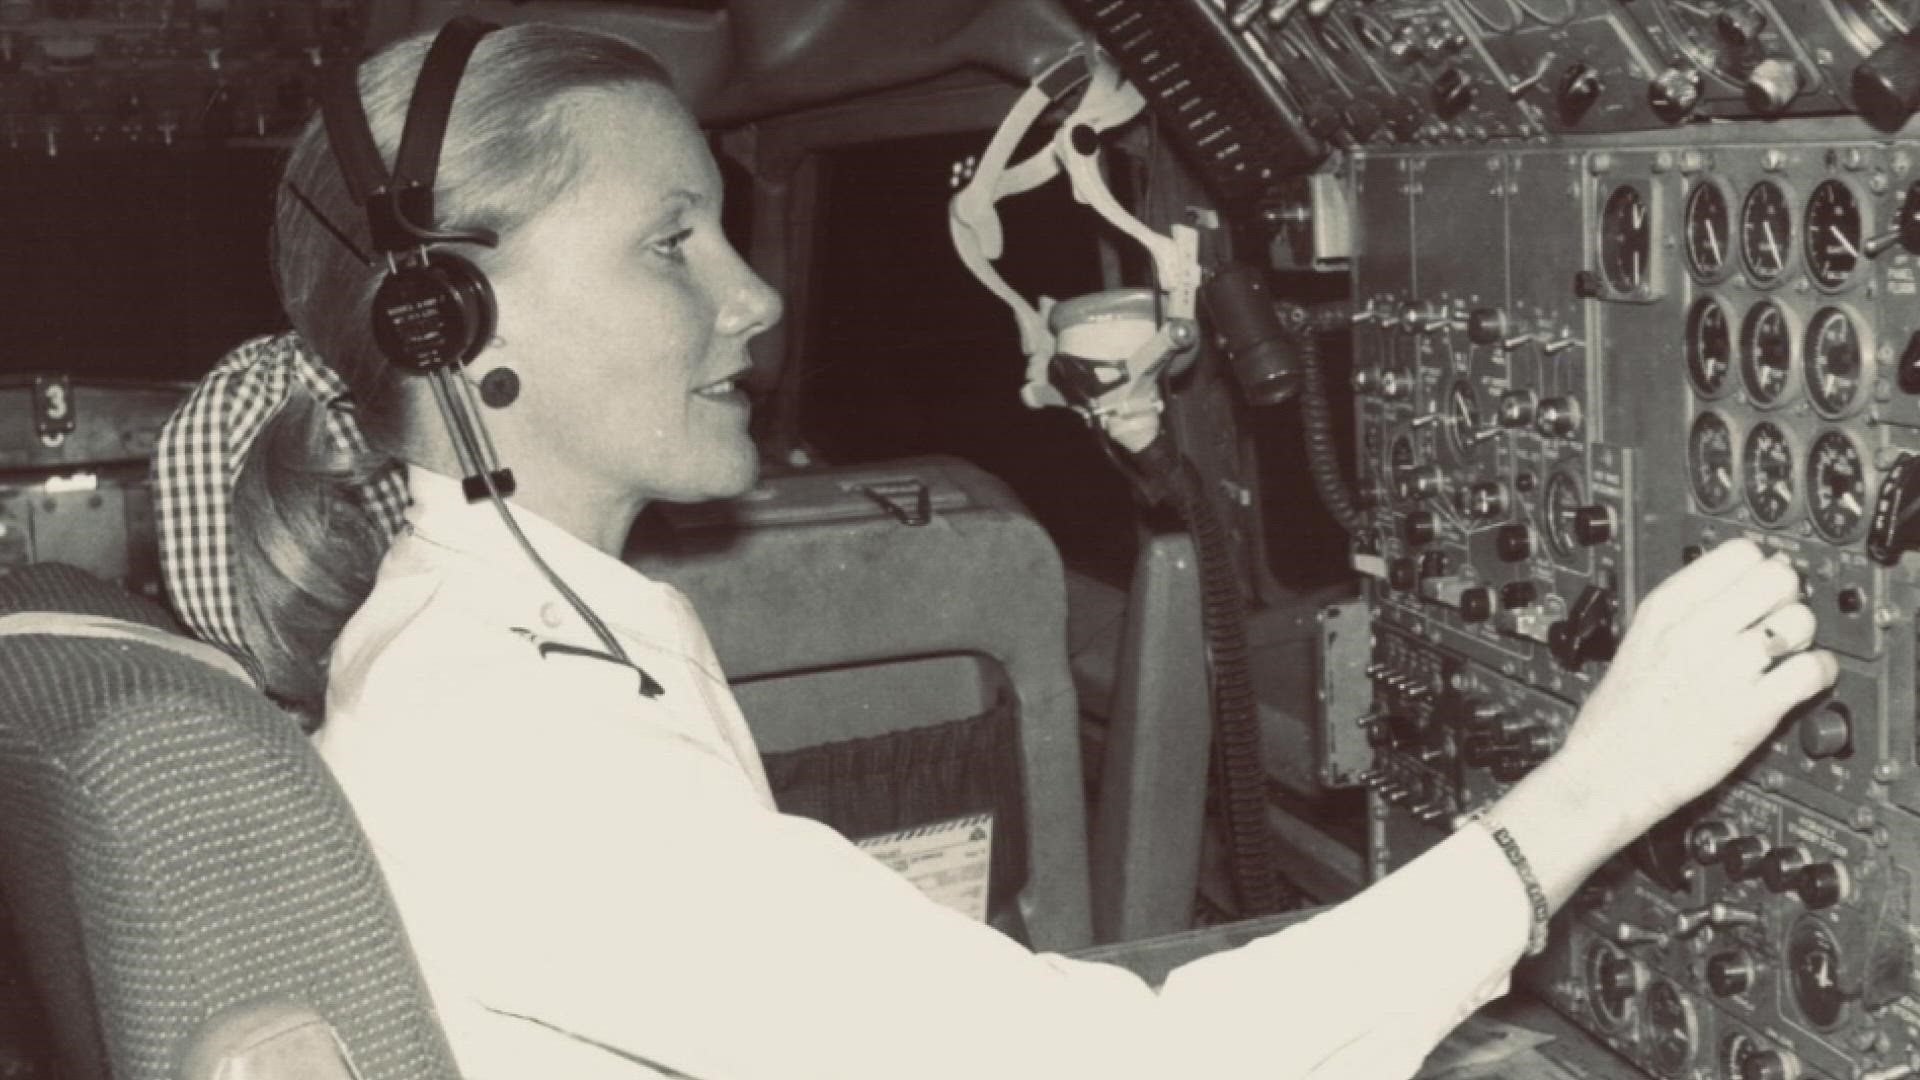 Beverley Bass was the first woman captain at American Airlines. After learning two planes had hit the World Trade Center, her plane was diverted to Gander.